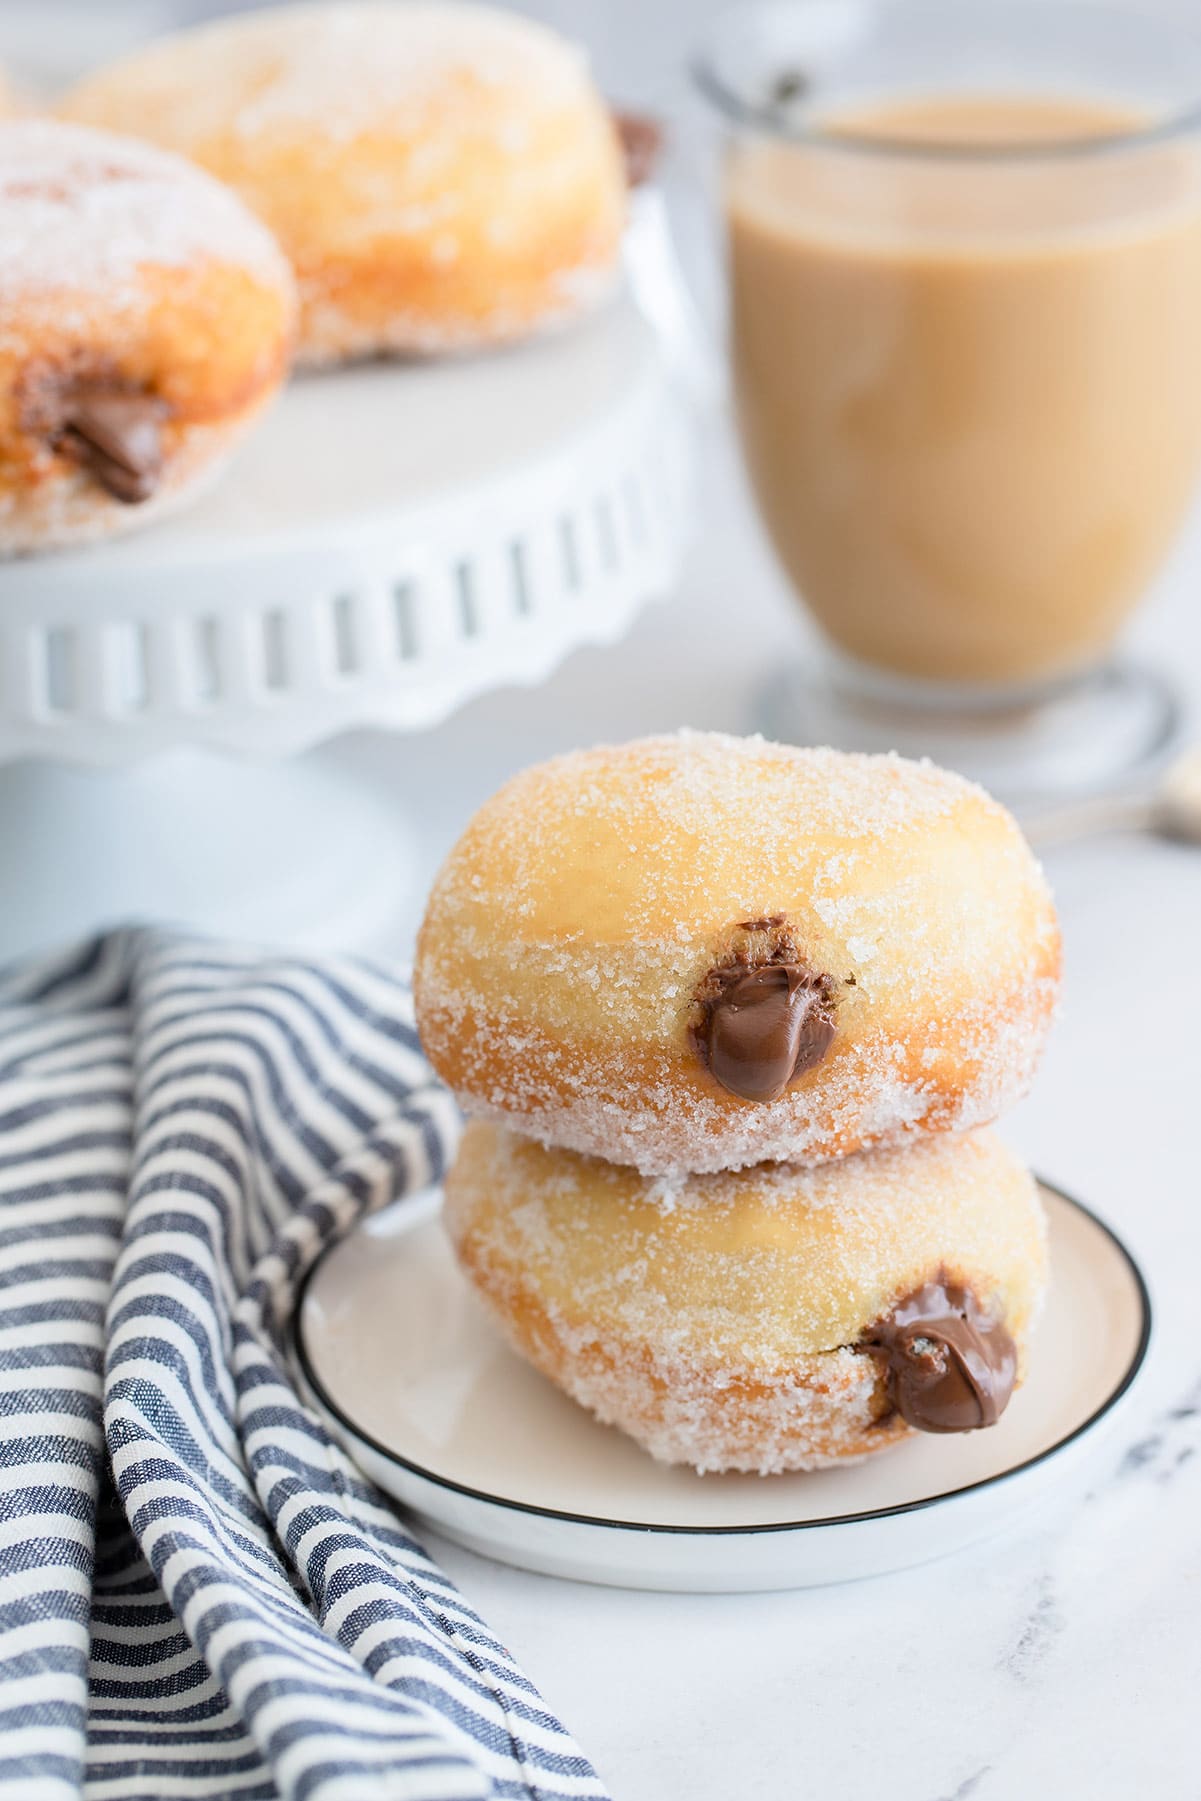 two nutella stuffed donuts on a small white plate with a blue and white towel on the side, a coffee and more donuts in the background.